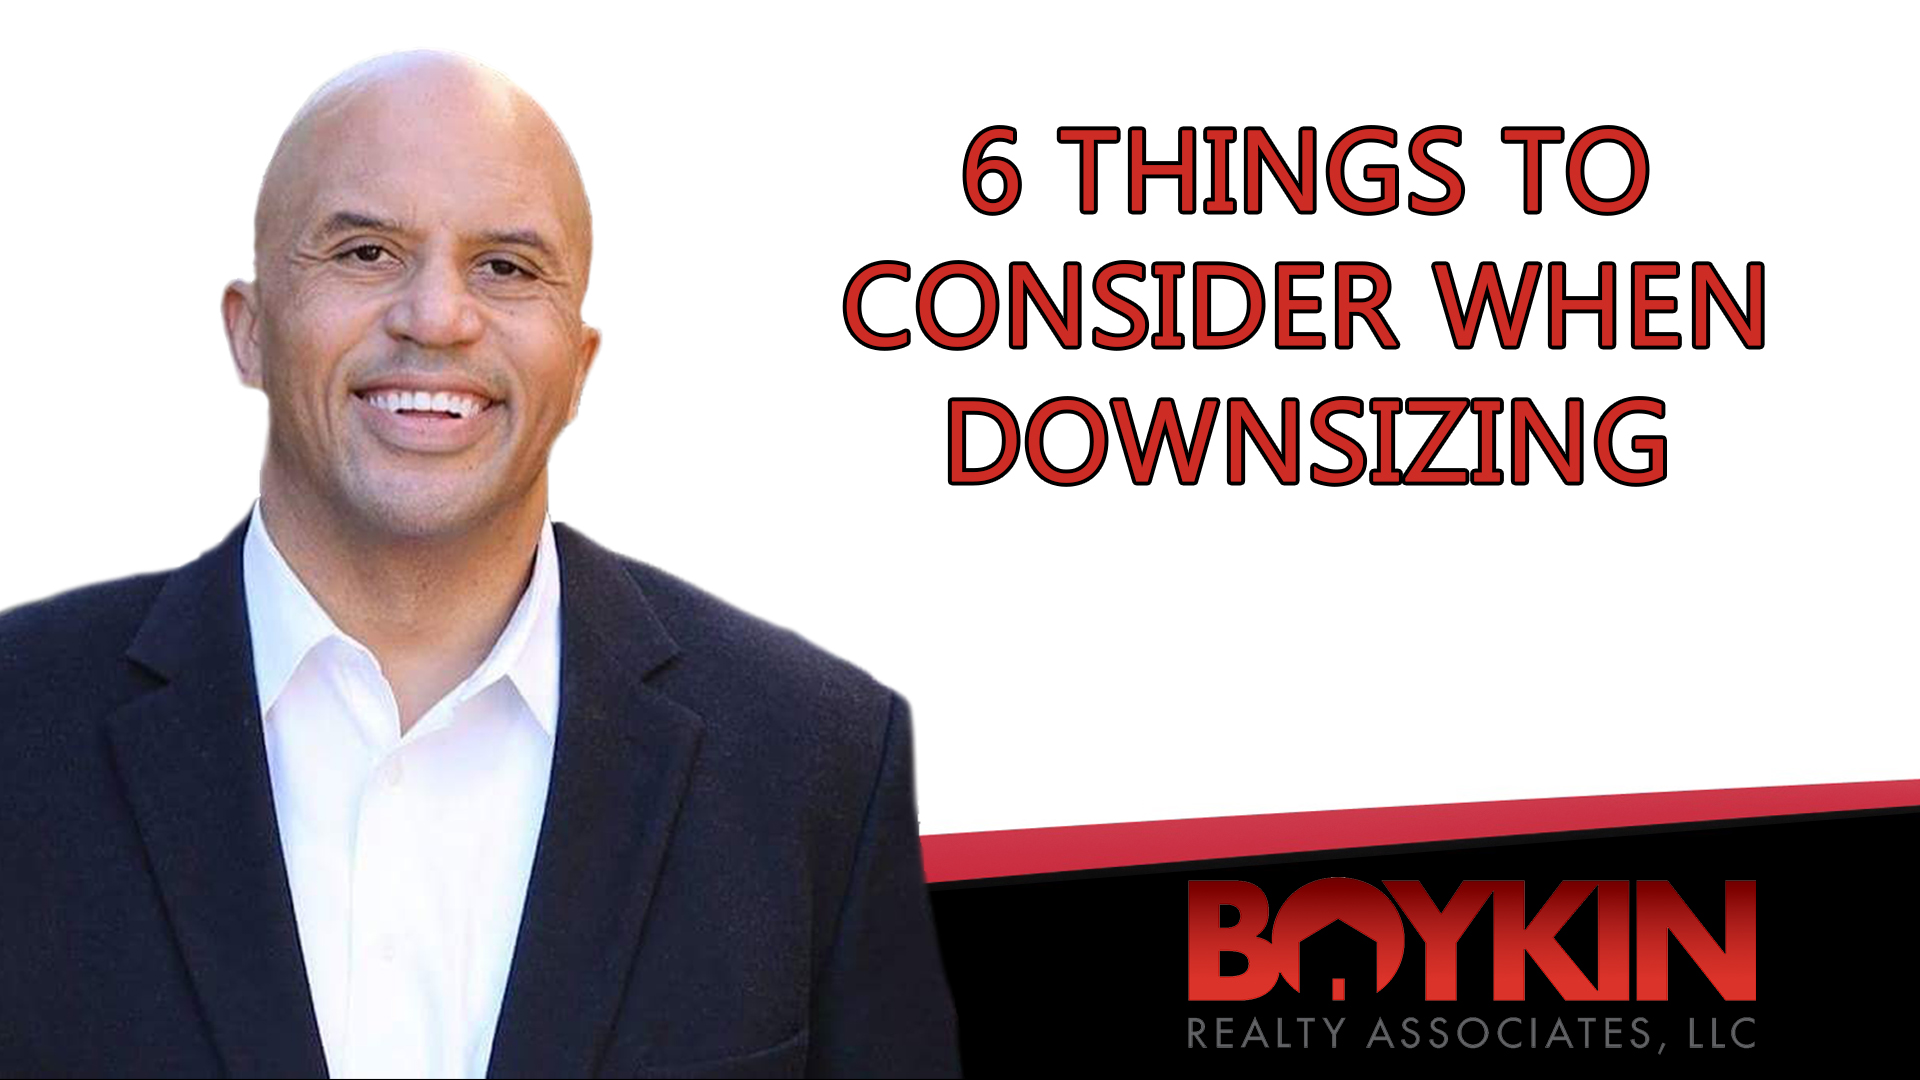 Ask Yourself These Questions Before Downsizing